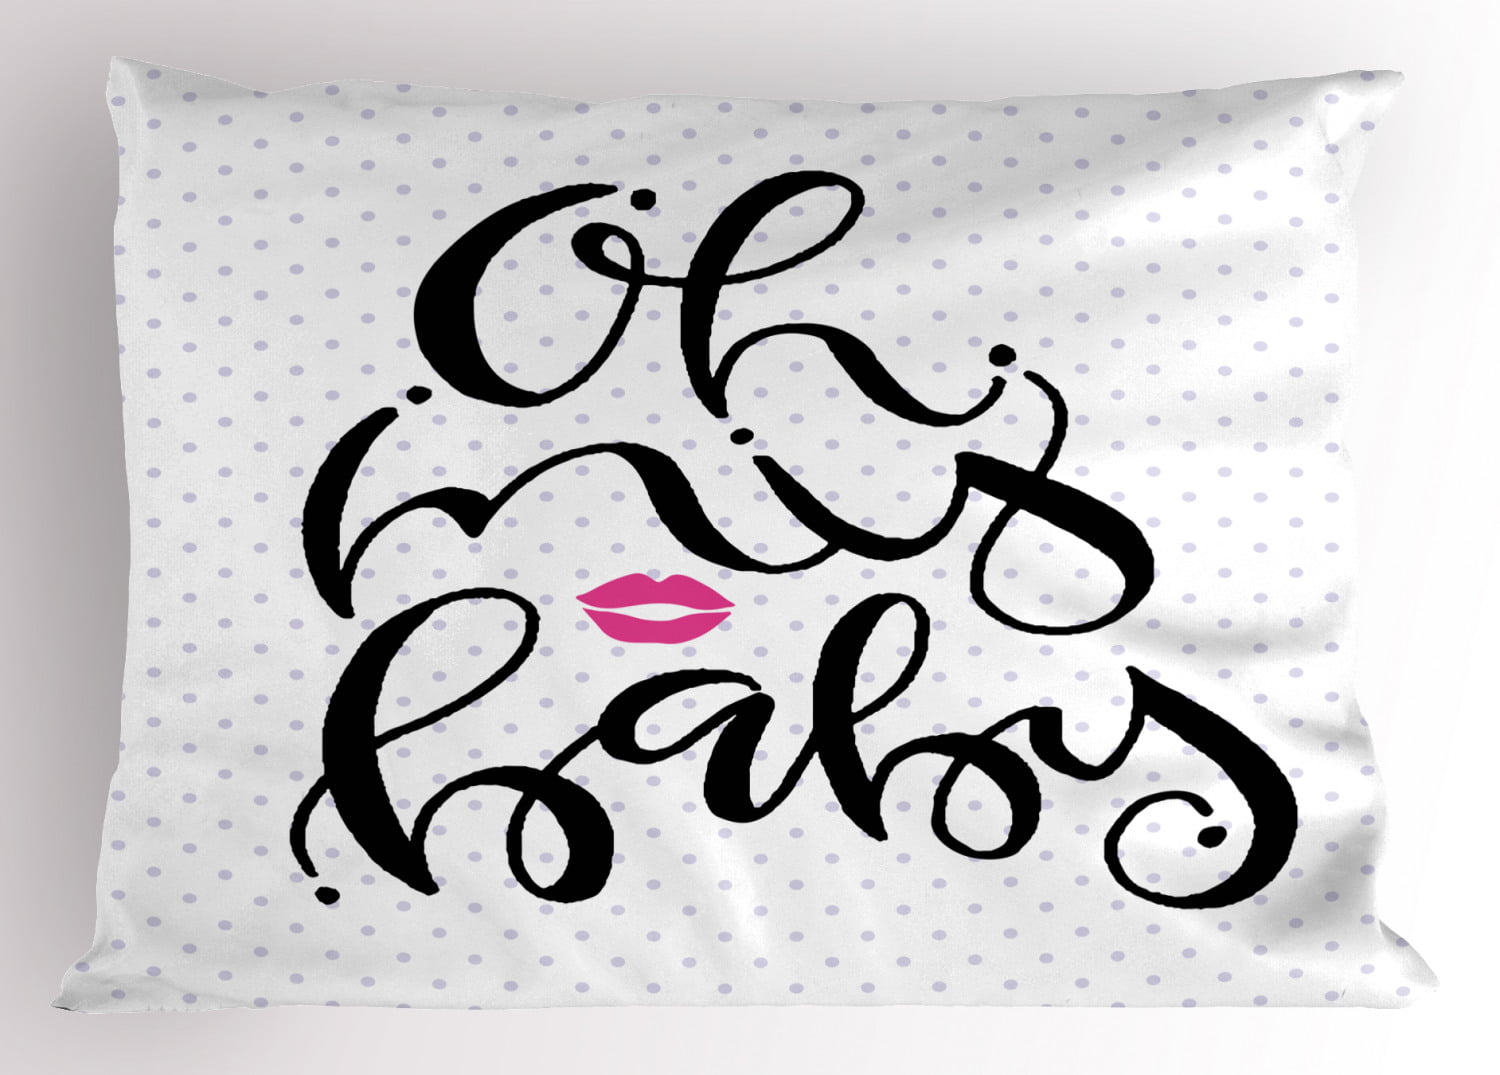 Details about  / Oh Baby Pillow Sham Decorative Pillowcase 3 Sizes Bedroom Decoration